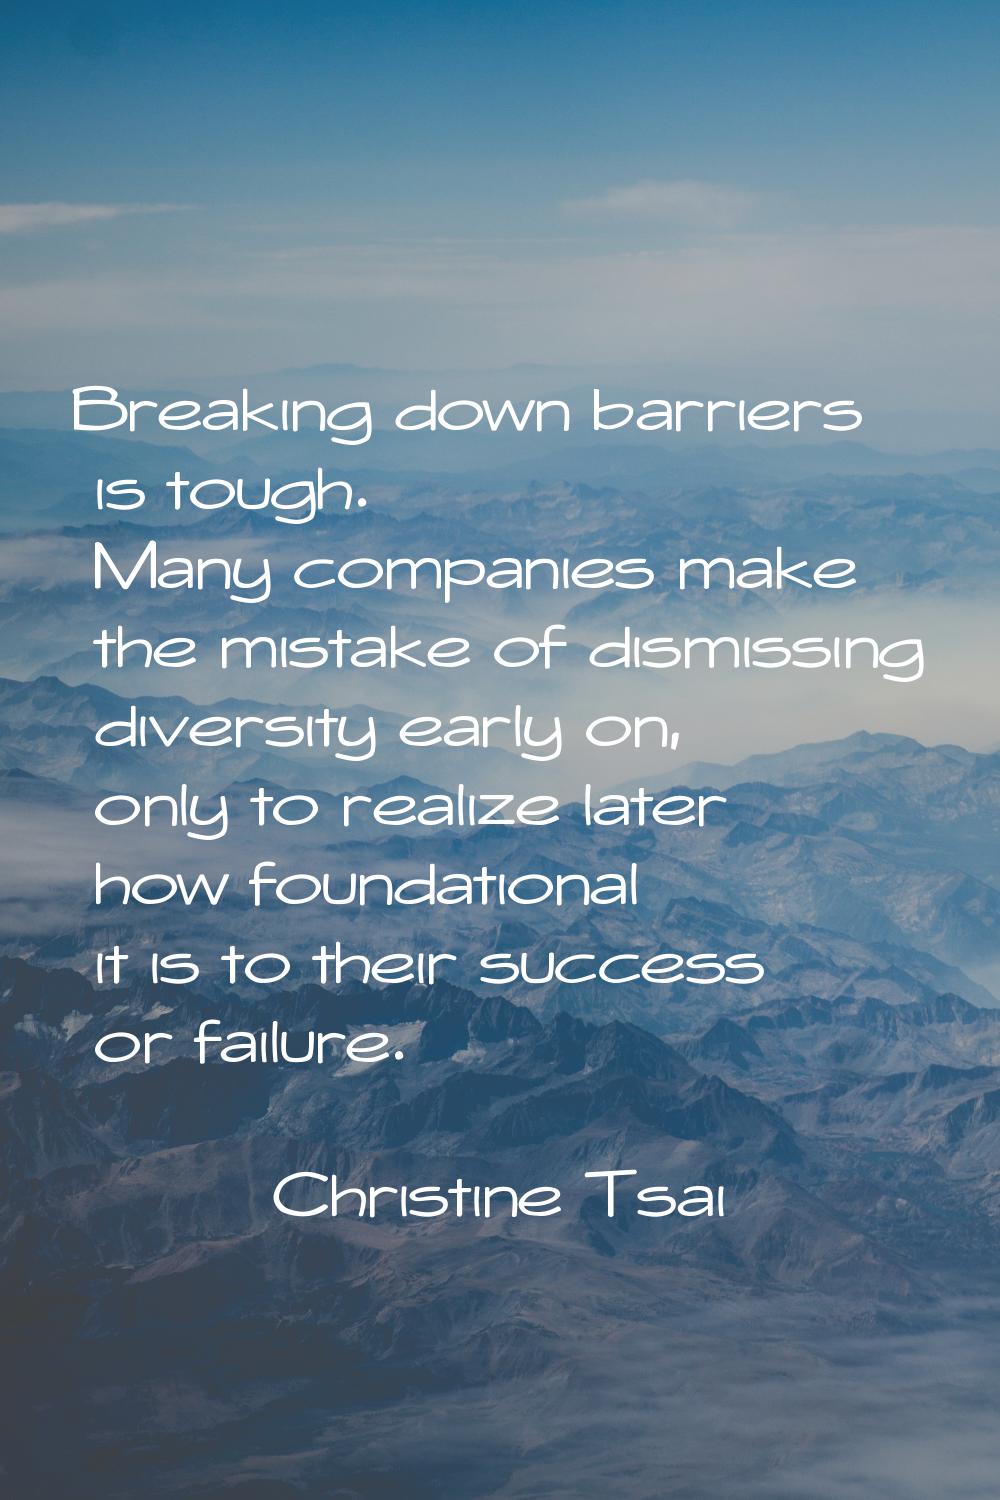 Breaking down barriers is tough. Many companies make the mistake of dismissing diversity early on, 